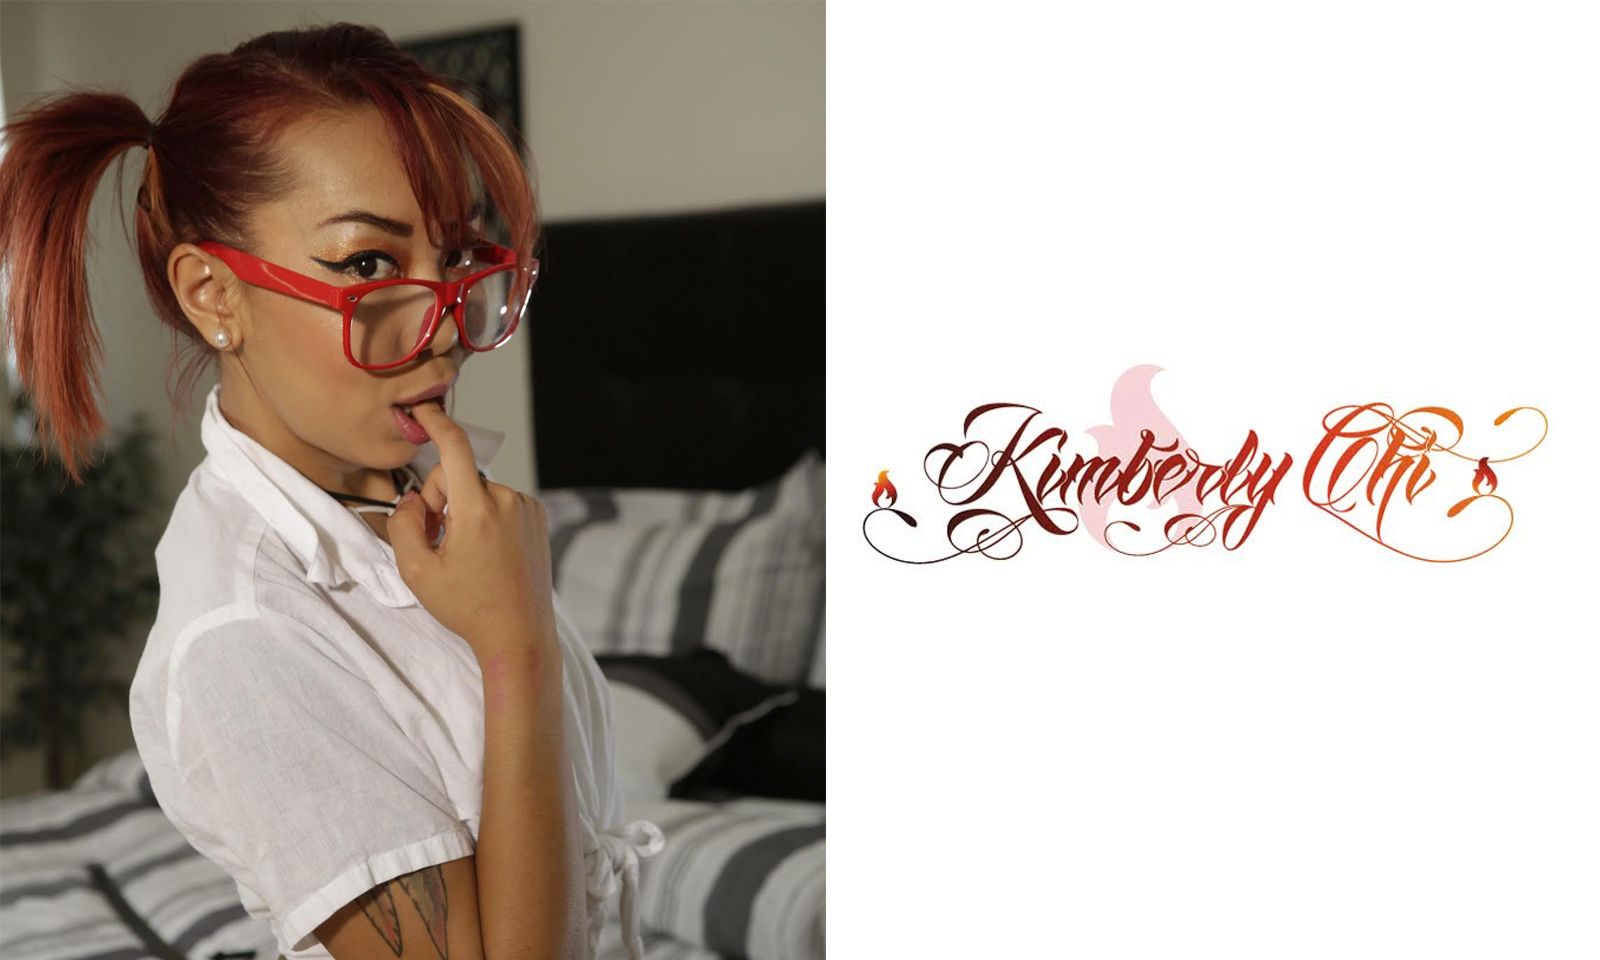 Kimberly Chi Launches New Website